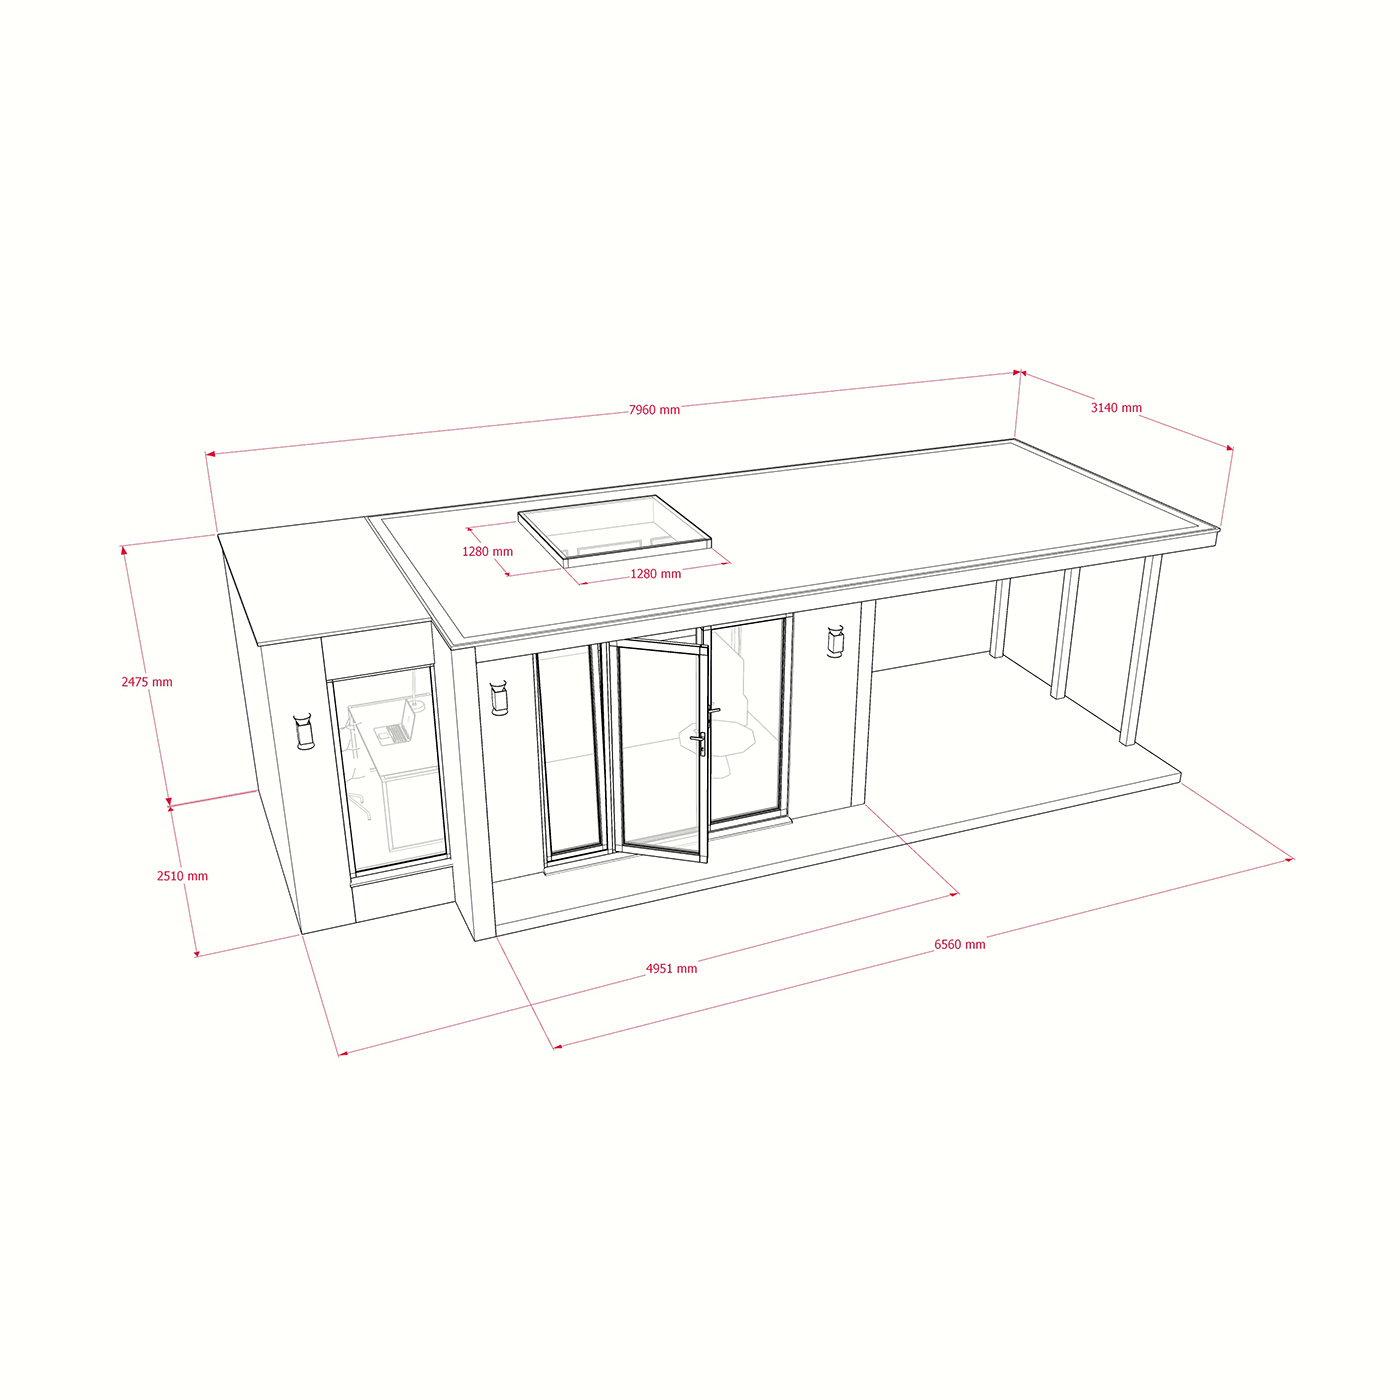 Exterior dimensions for 2.6m by 5.0m garden room